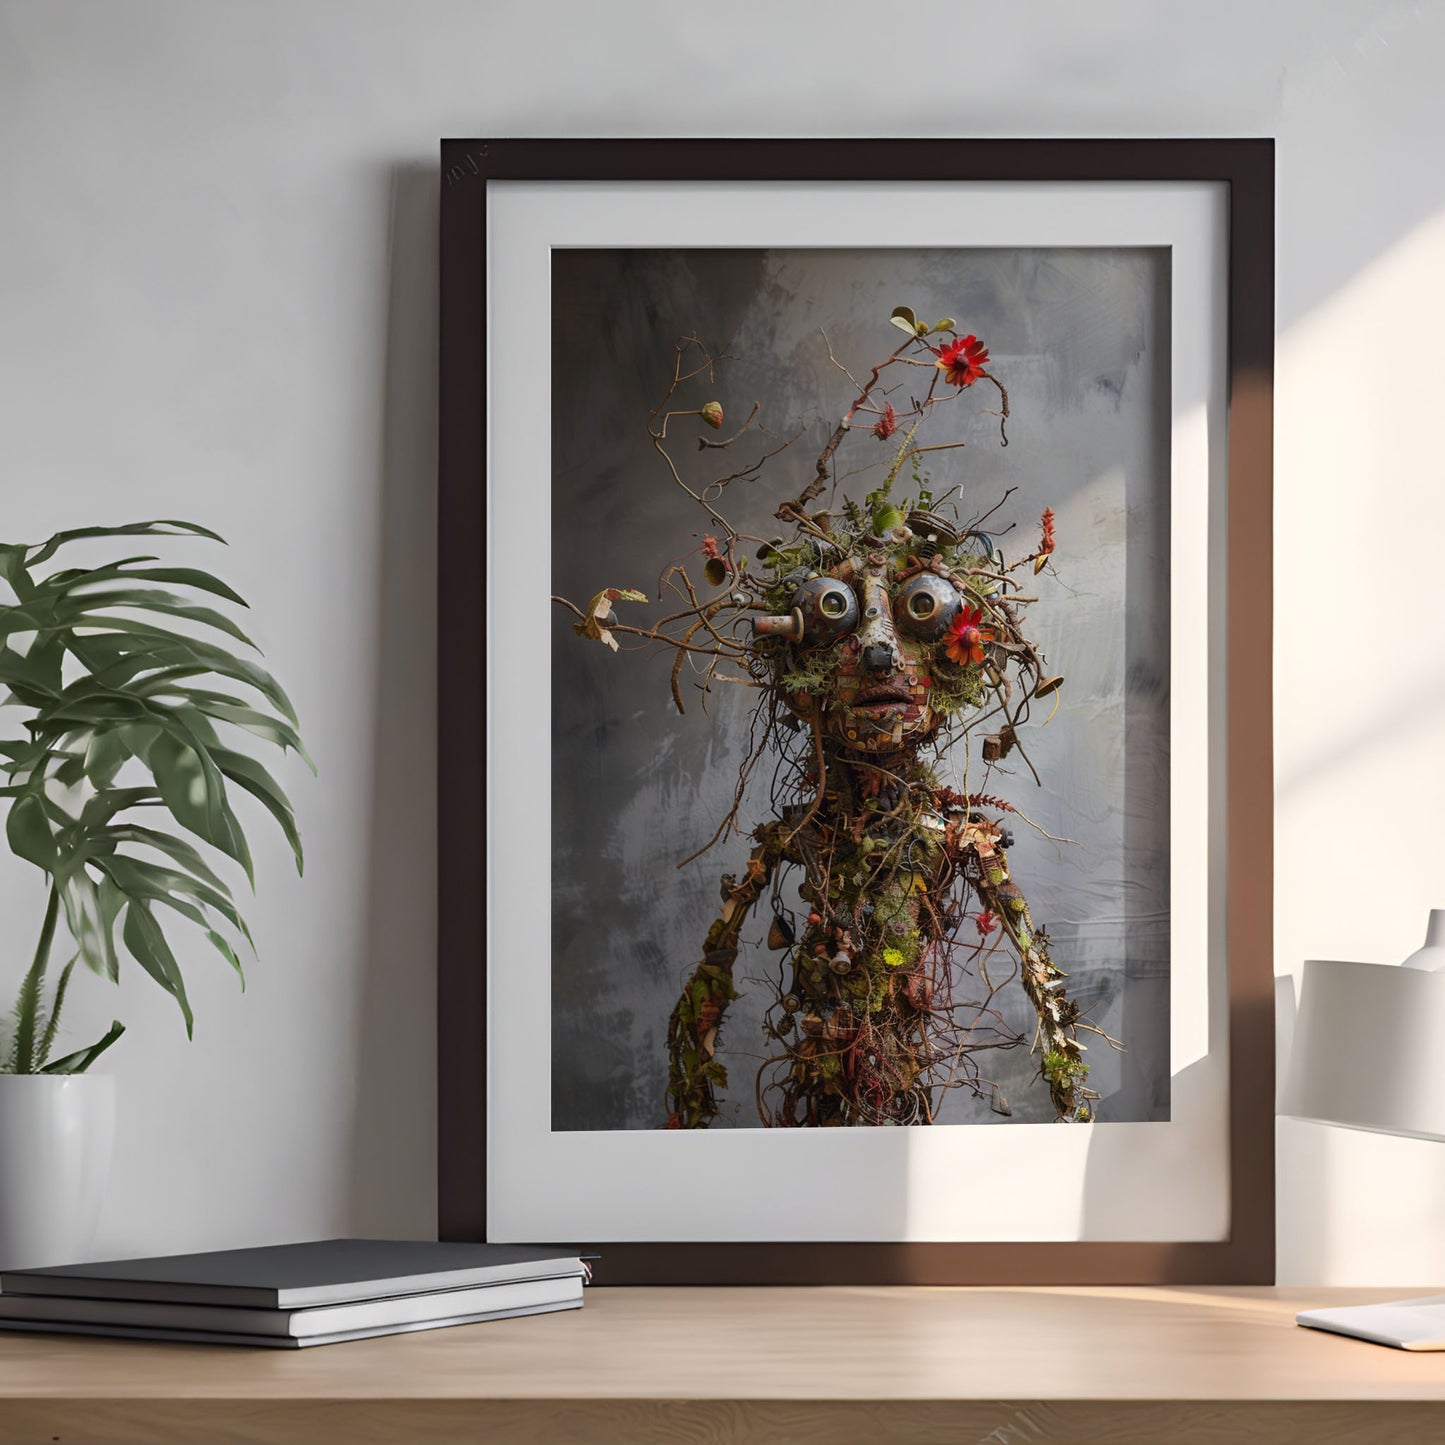 Funky Bio Robot Poster - Quirky Wall Art with Chameleon Twist